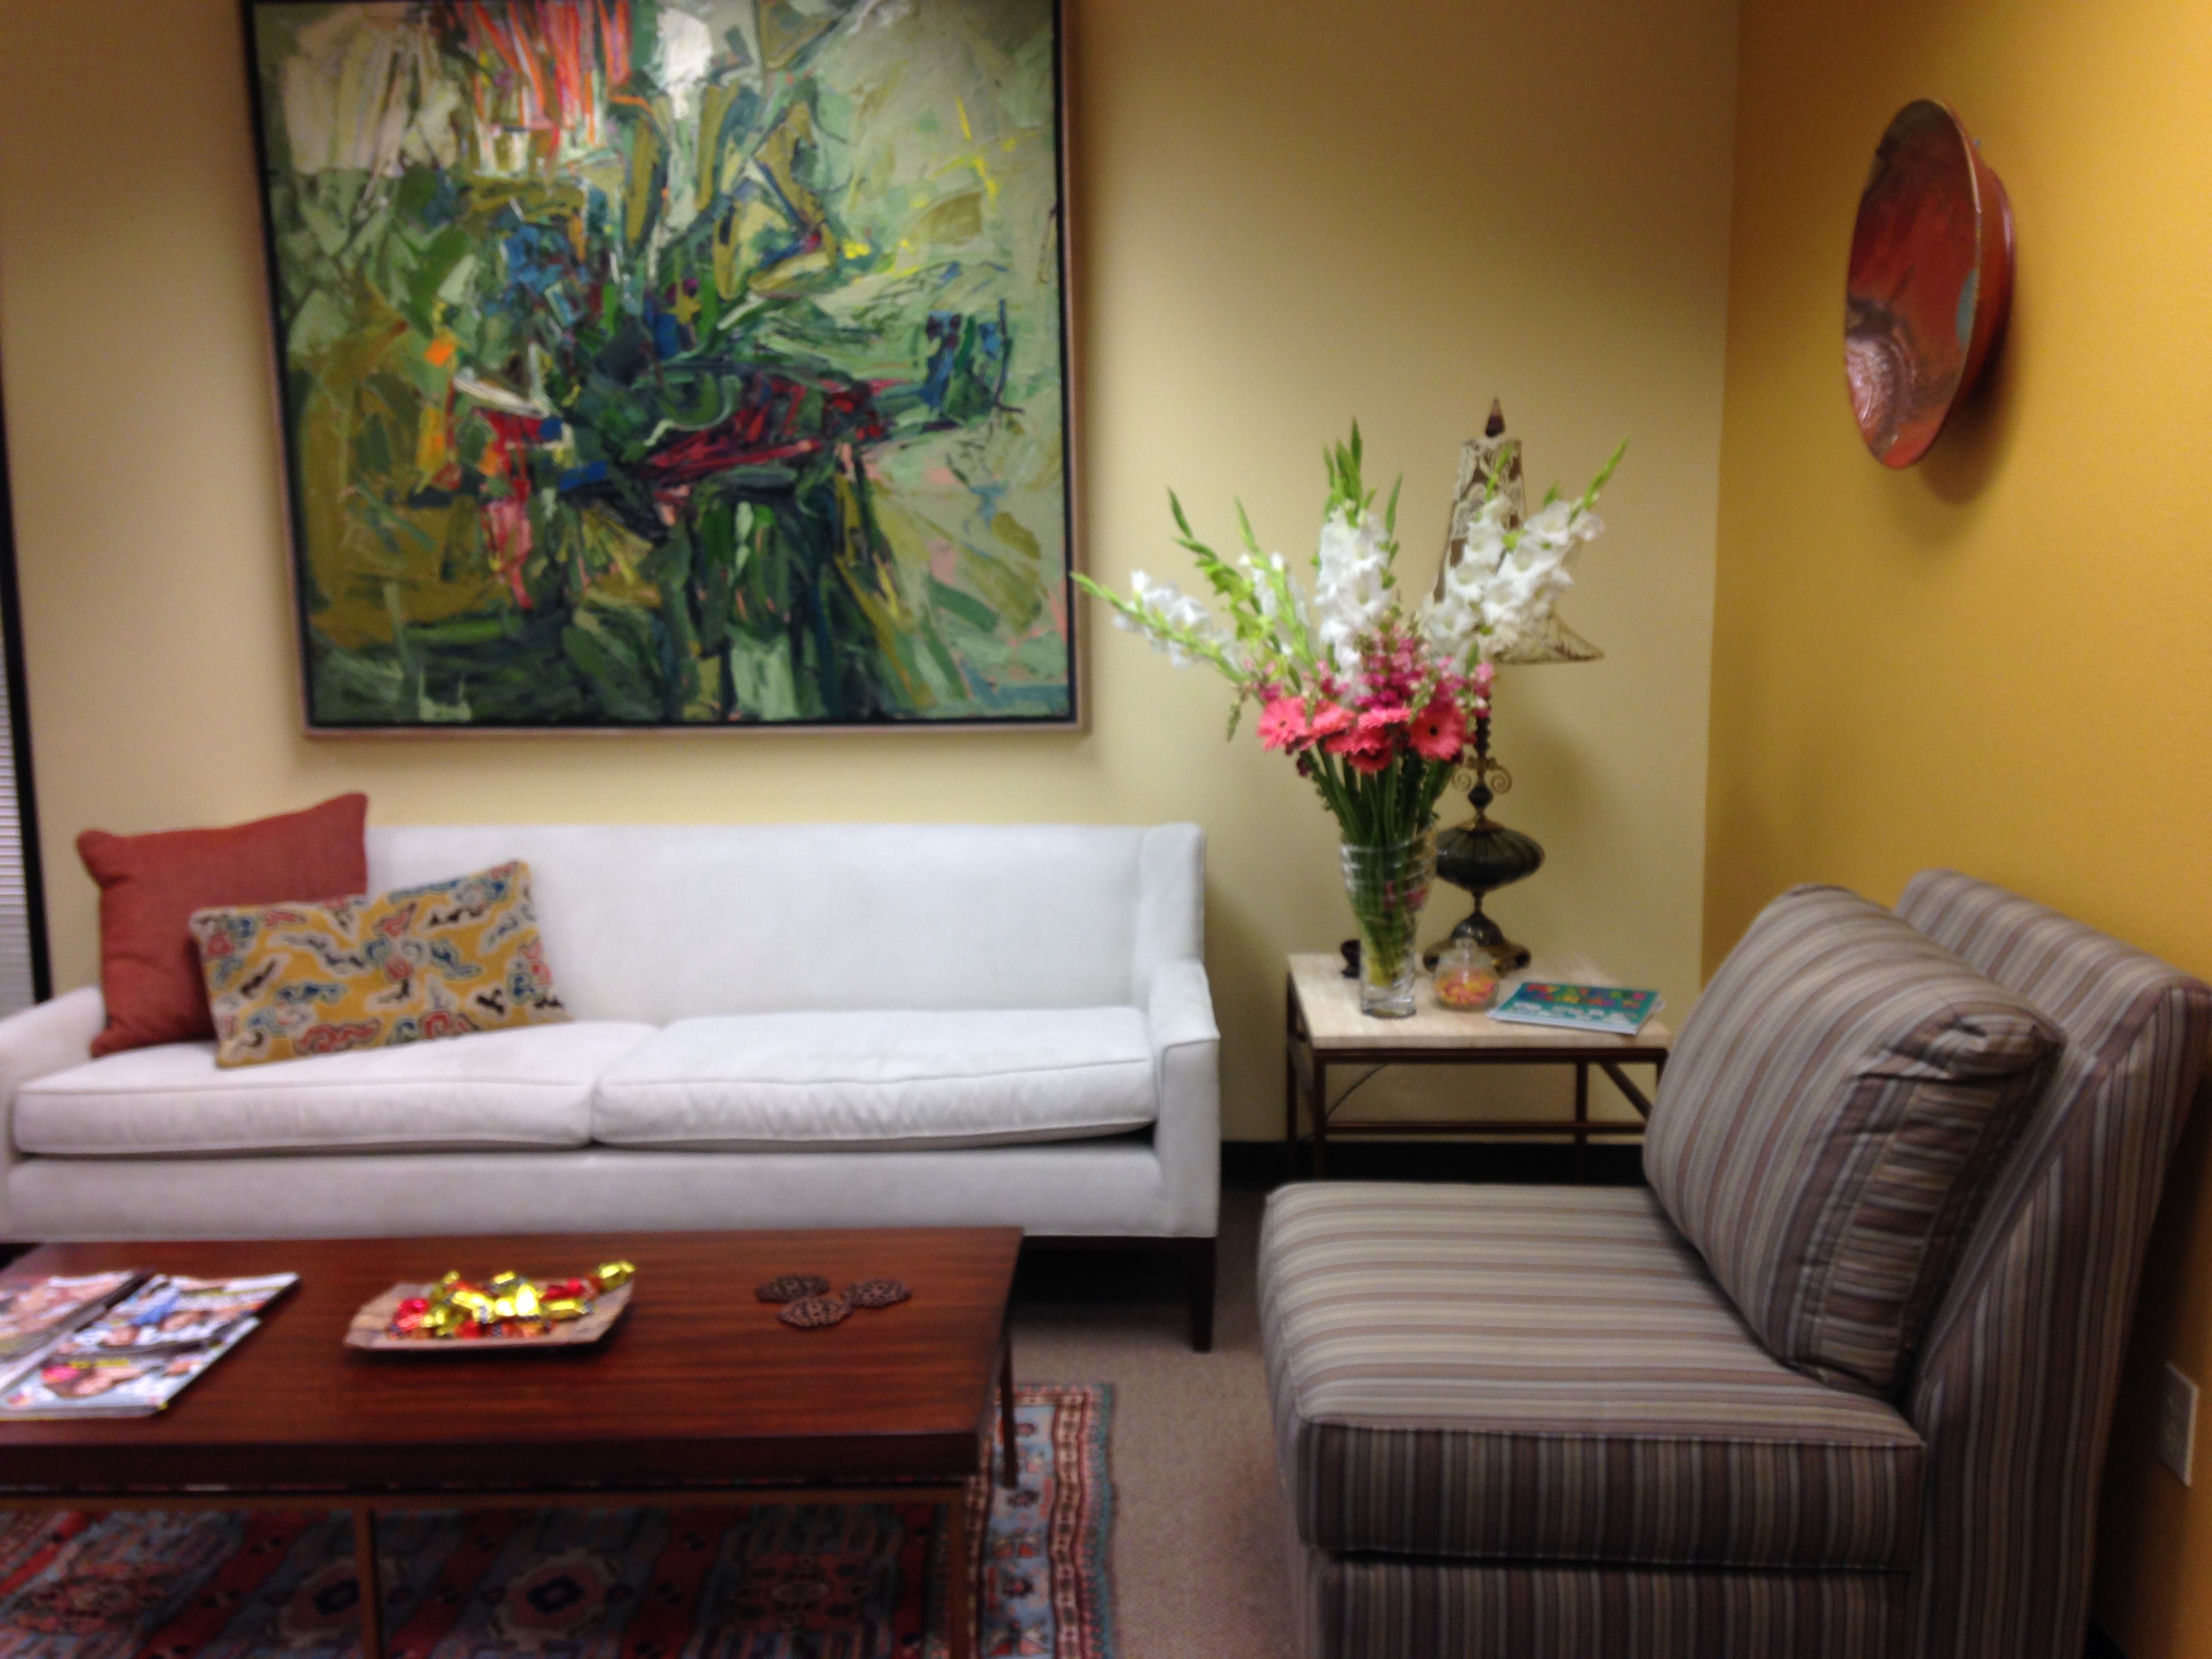 The waiting room at Bier Family Law: Your place of refuge in the midst of turmoil.